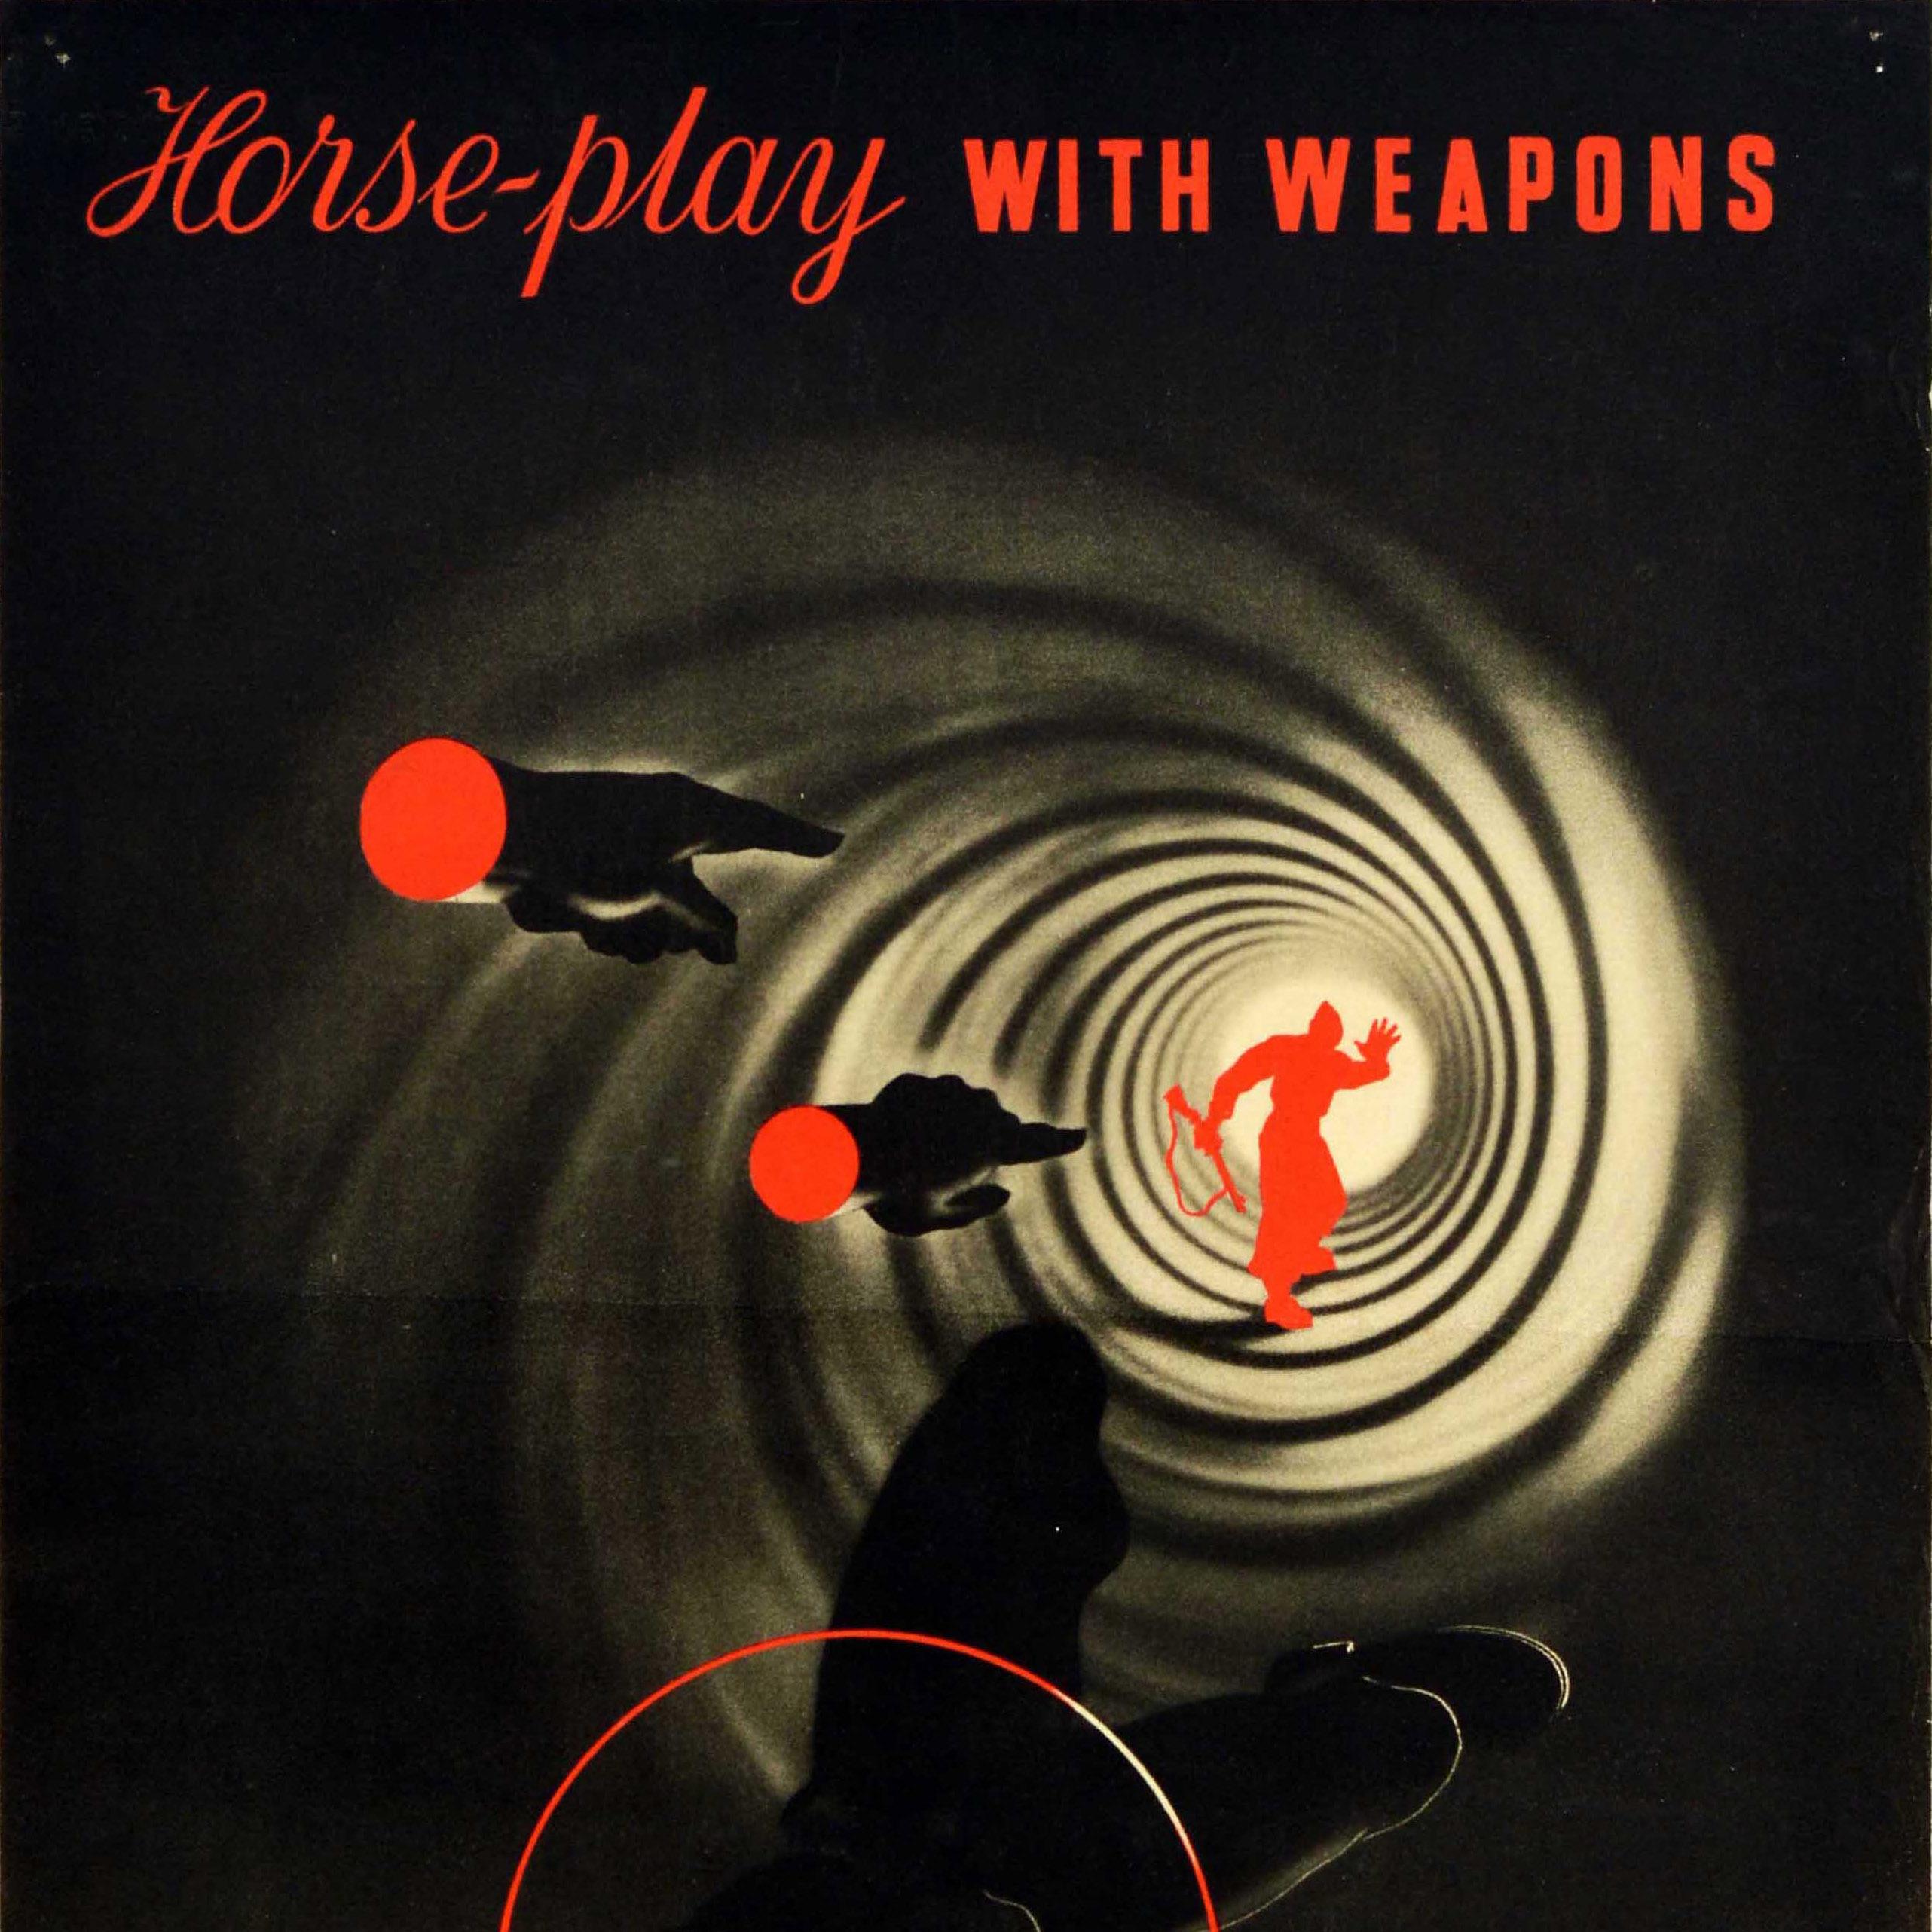 Britannique Original Vintage World War Two Safety Poster Horse Play With Weapons WWII Games en vente